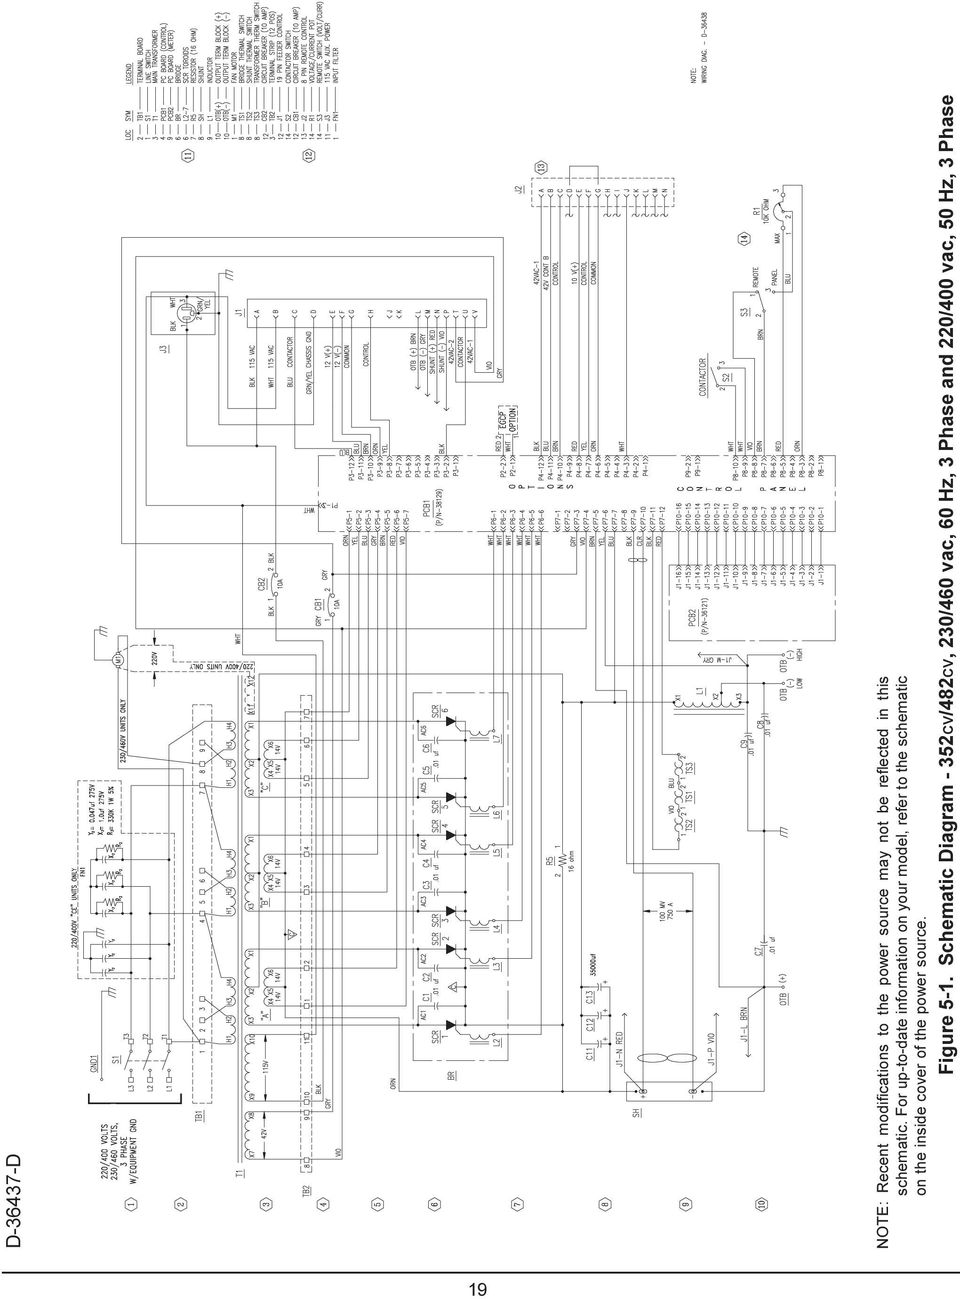 For up-to-date information on your model, refer to the schematic on the inside cover